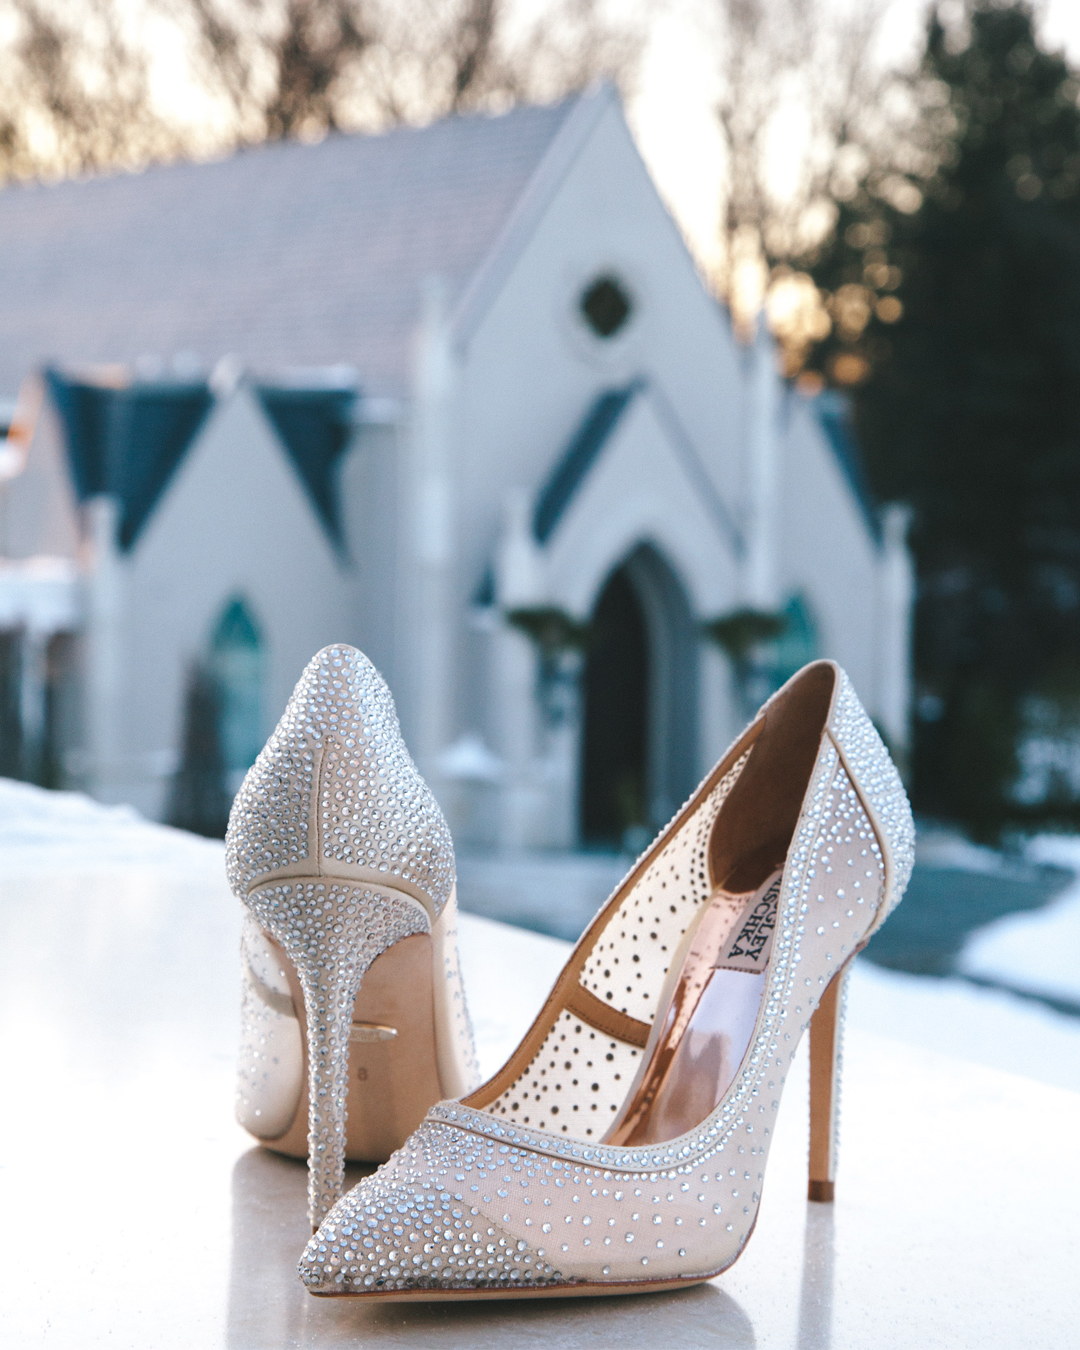 Pair of elegant heels positioned in front of a church.